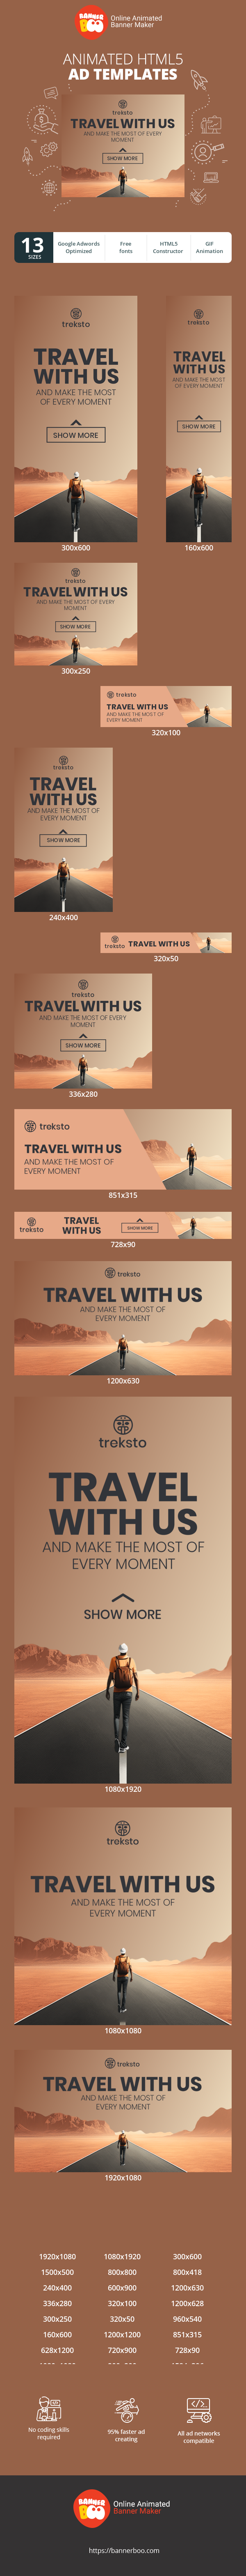 Banner ad template — Travel With Us — And Make The Most Of Every Moment